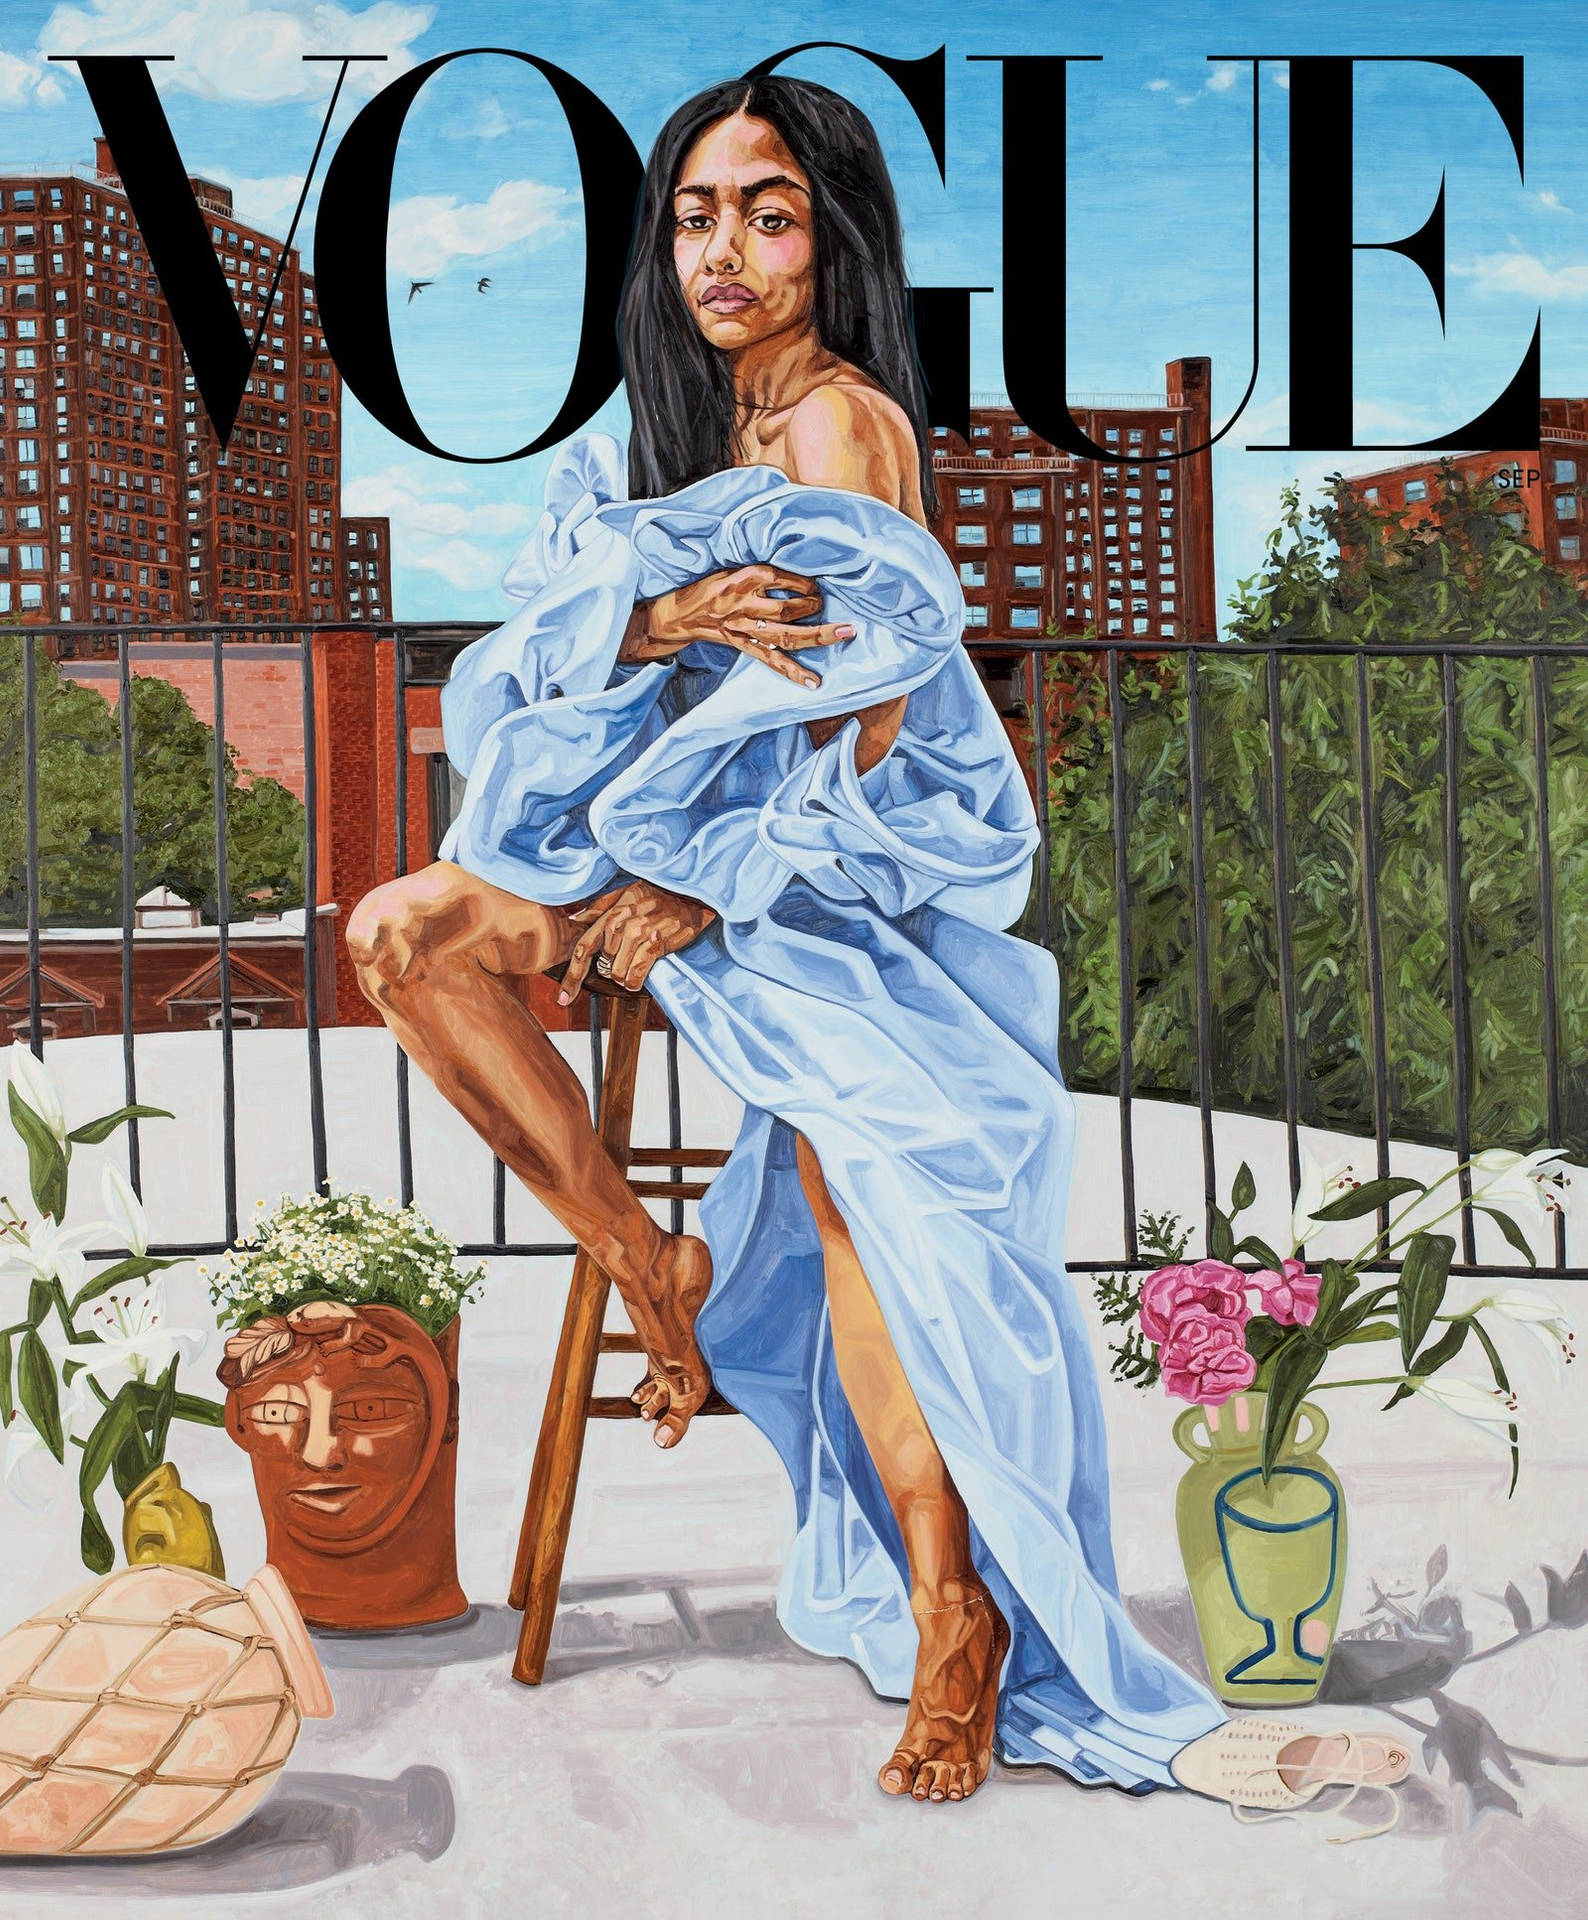 Jordan Casteel Vogue's Style Cover Painting Background